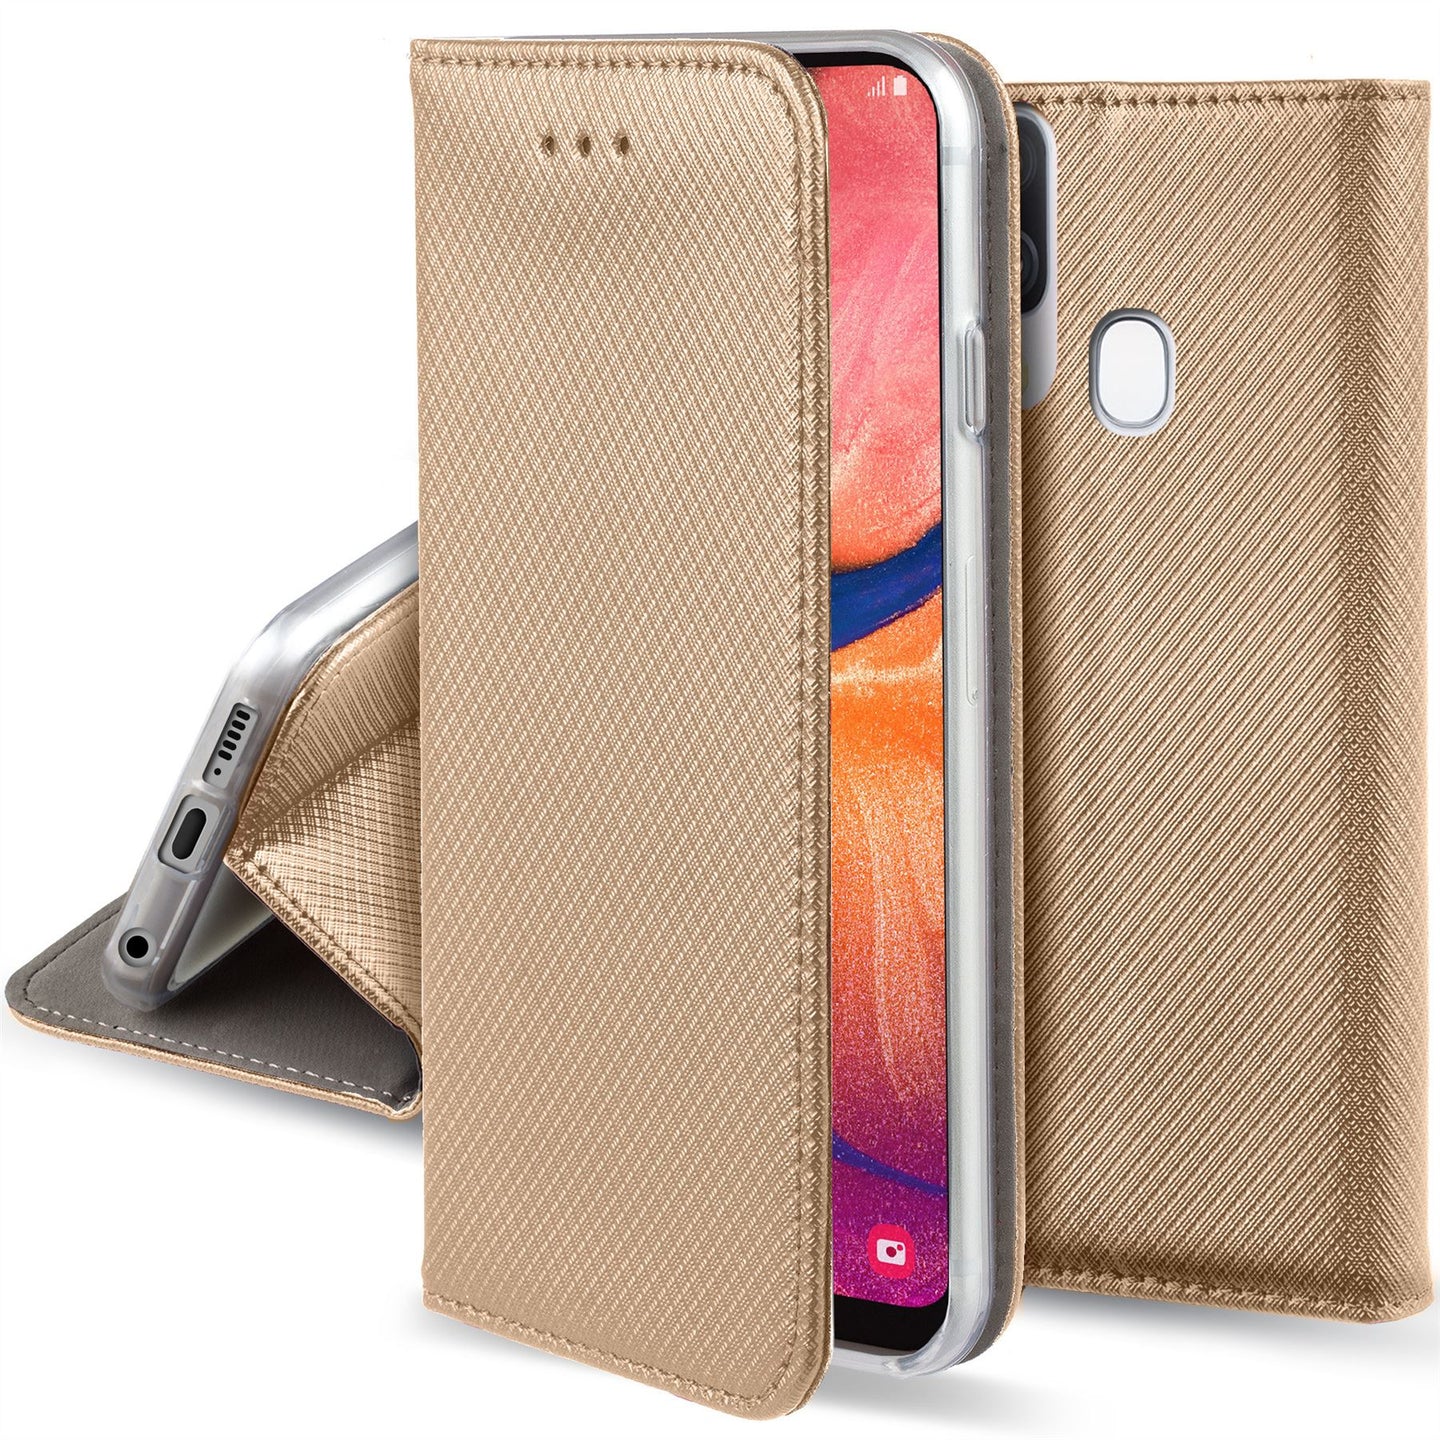 Moozy Case Flip Cover for Samsung A20e, Gold - Smart Magnetic Flip Case with Card Holder and Stand